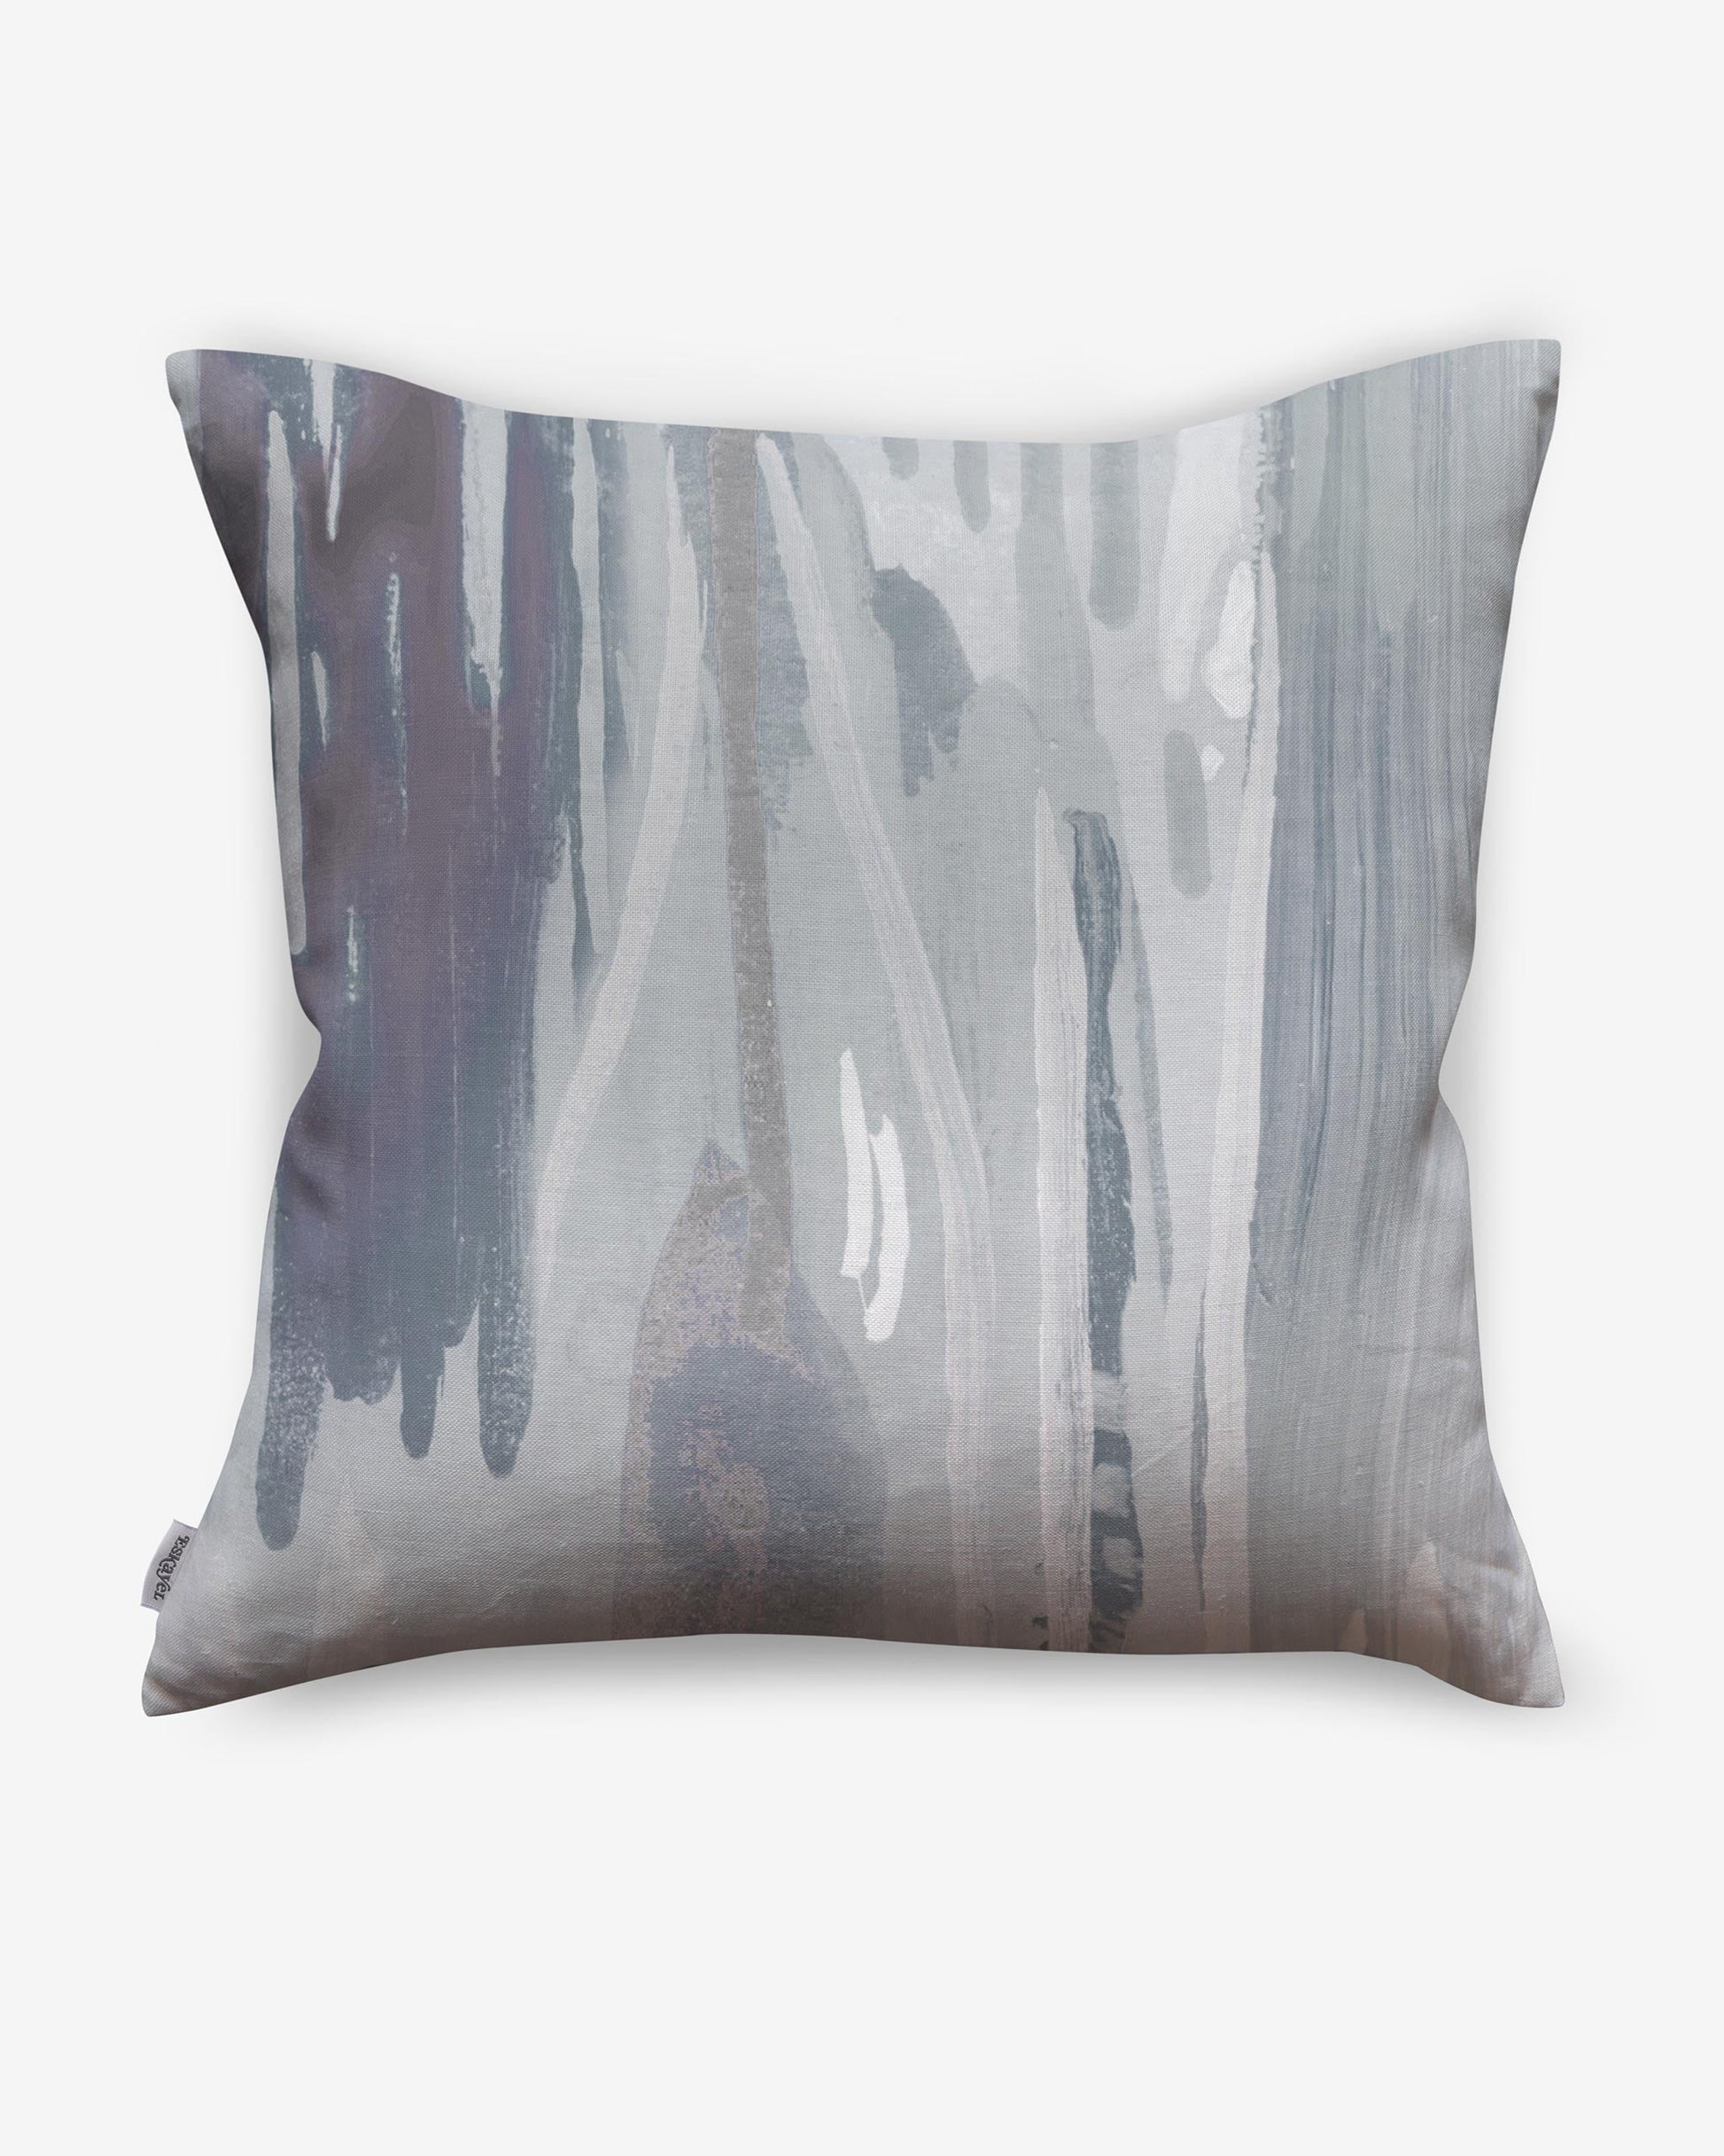 A Majorelle Pillow Blanca with an abstract painting inspired by Majorelle Gardens in Marrakech, Morocco